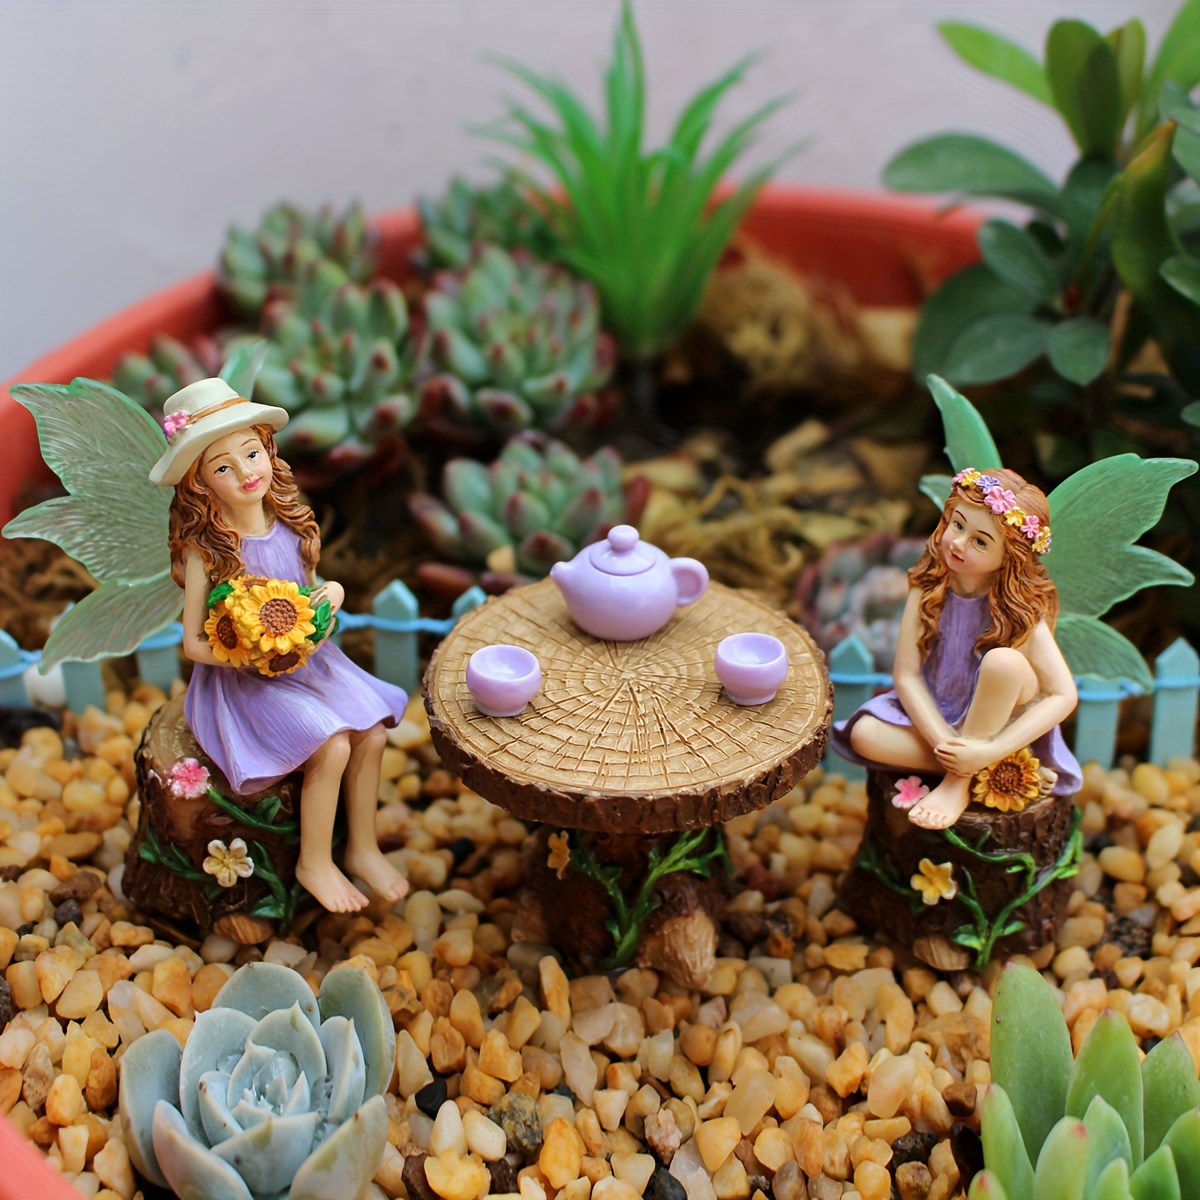 

1 Set Summer Tea Party Fairy Figurines, Whimsical Miniature Scene Simulation, Outdoor Fairy Garden Resin Statues, Decorative Art Style, Patio Lawn Home Decor Crafts